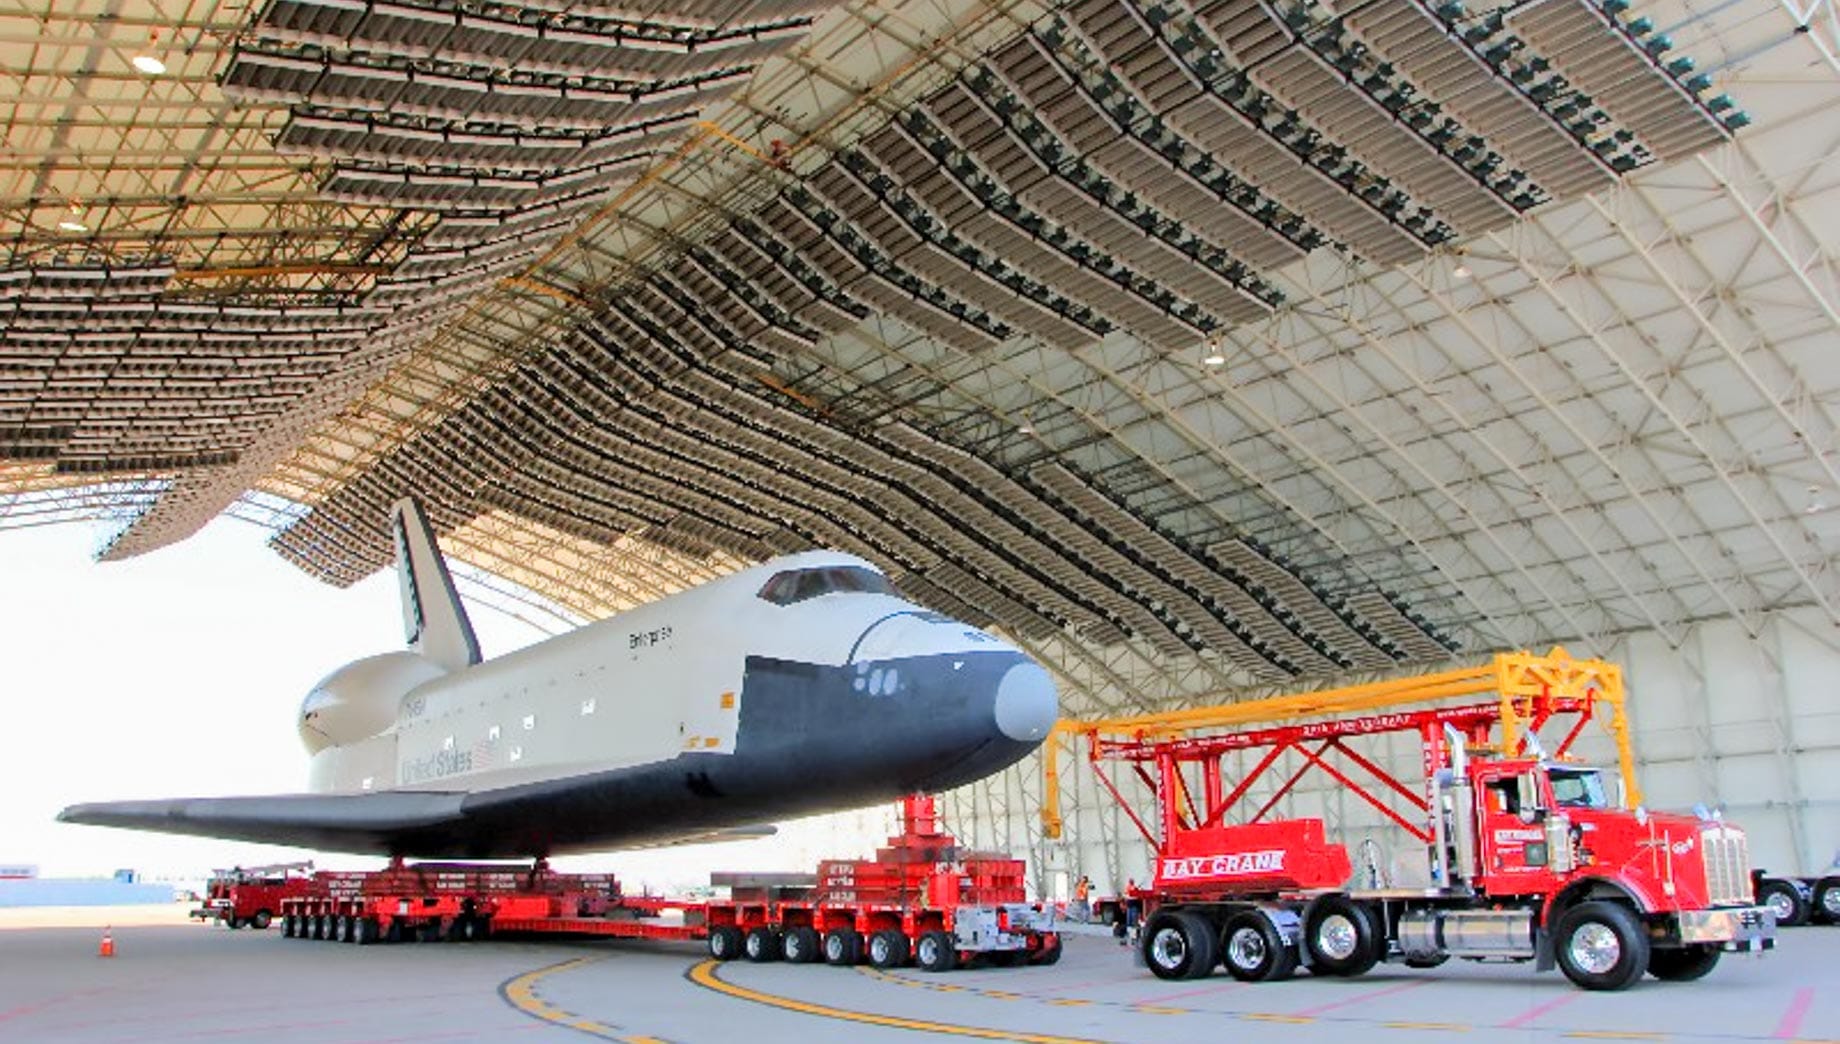 Truck transporting space shuttle from hangar